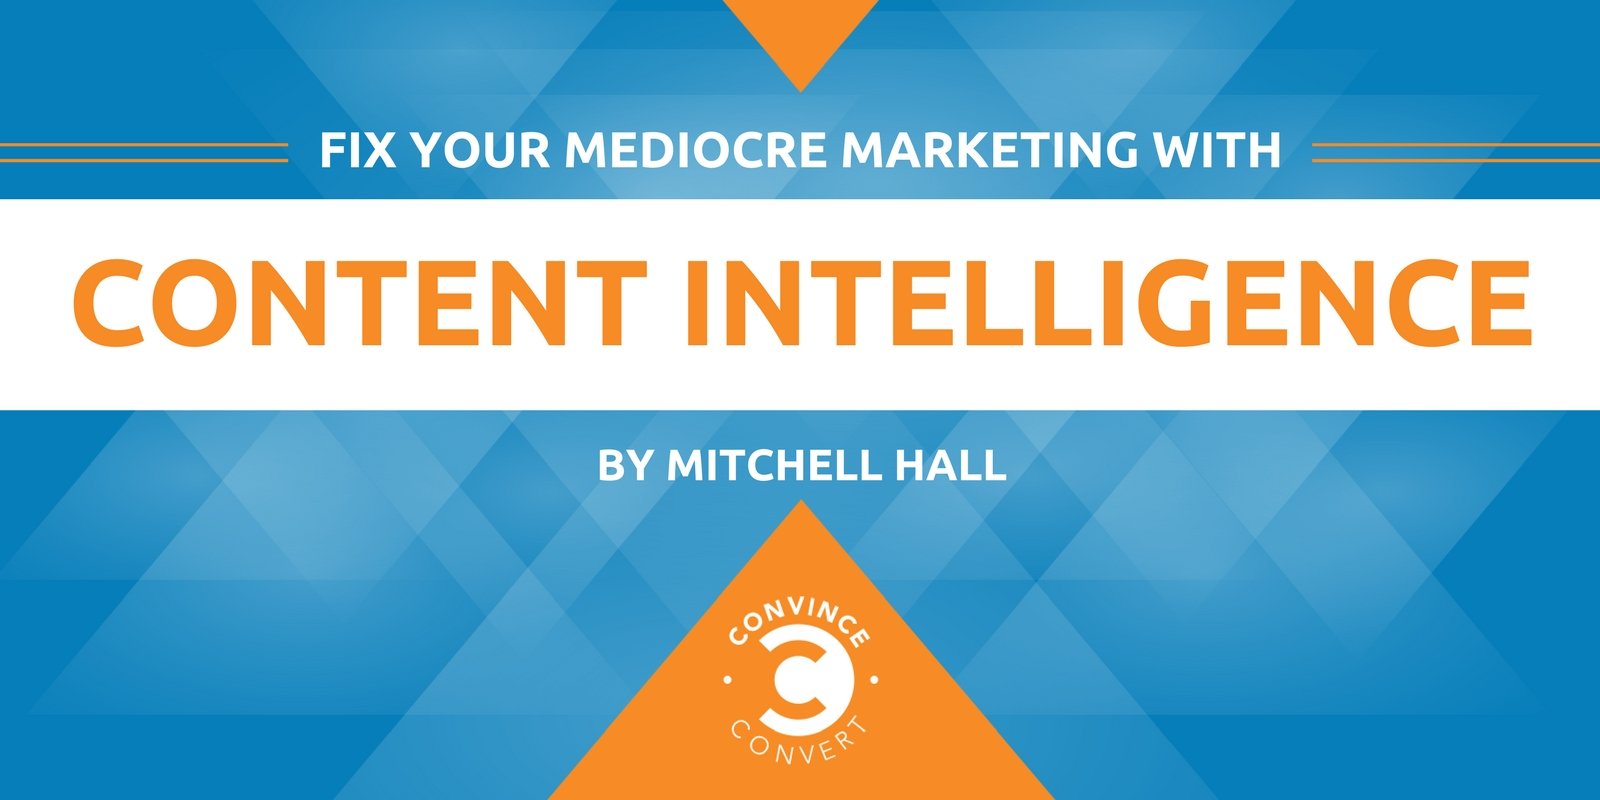 Fix Your Mediocre Marketing with Content Intelligence